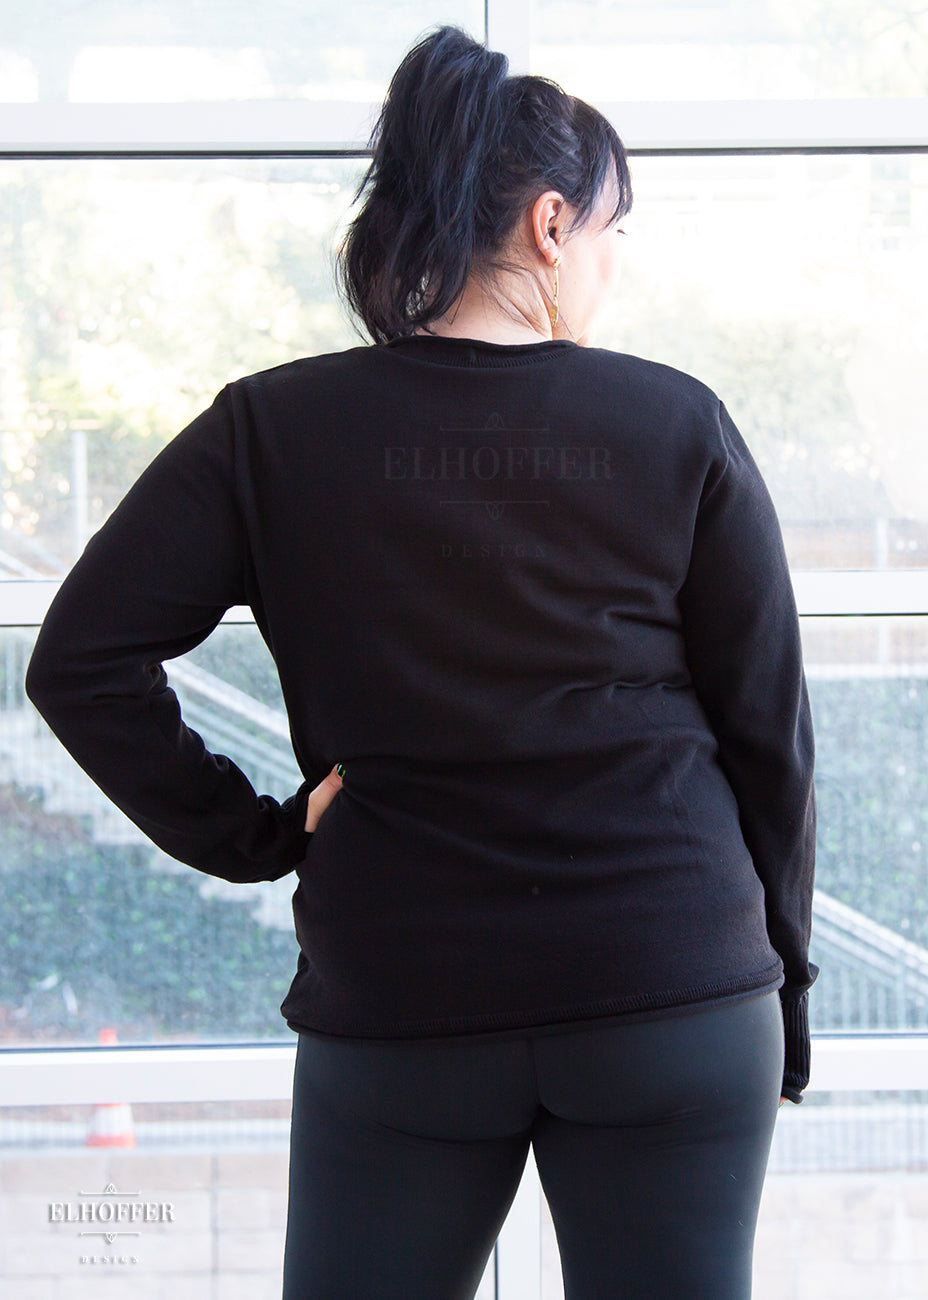 Bernadette is modeling the Sample XL, which has a very slouchy look in comparison to her usual size L. She has a 40” Chest, 36.5” Waist, 43” Hip, and is 5’6”